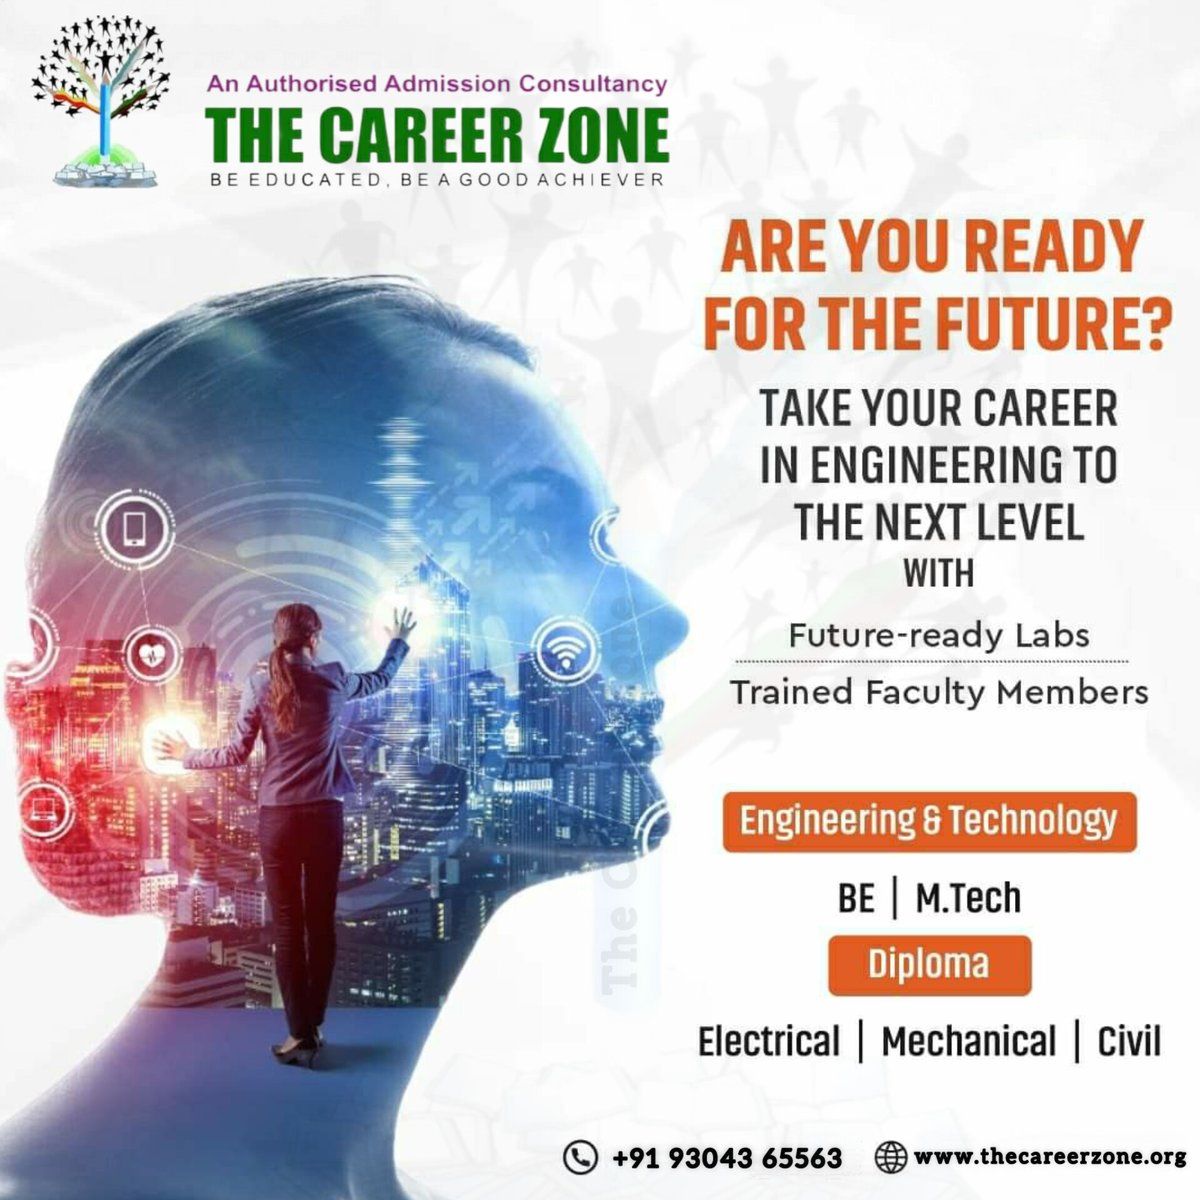 If you love solving a problem and creating solutions, then engineering is the right field for you!

#thecareerzone #careercounsellor #careeradvice #careergrowthtips #engineering #careeropportunity #growth #success #learning